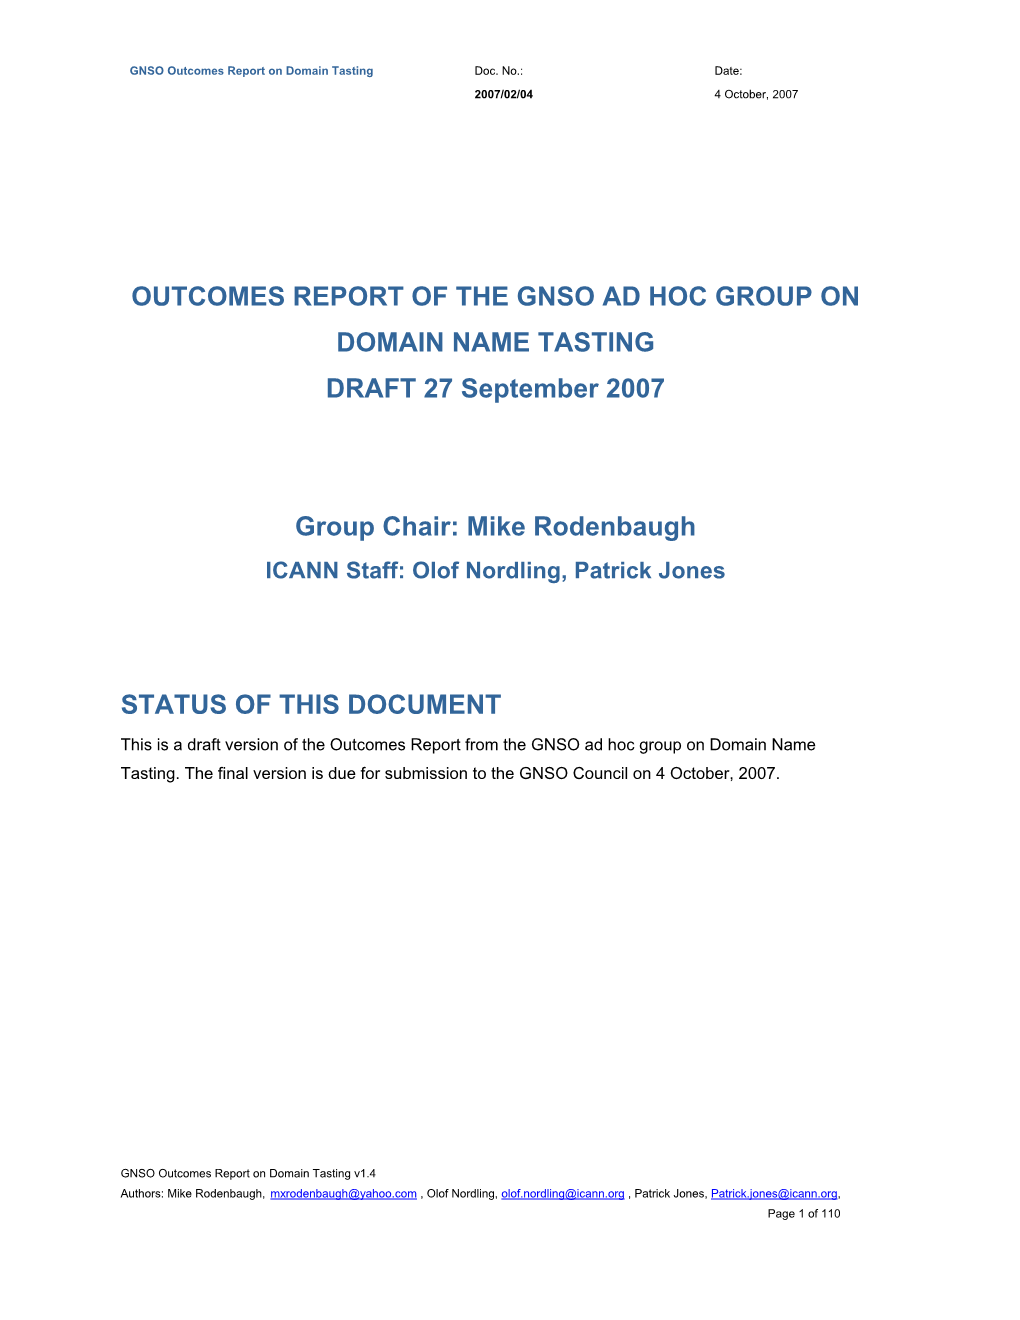 OUTCOMES REPORT of the GNSO AD HOC GROUP on DOMAIN NAME TASTING DRAFT 27 September 2007